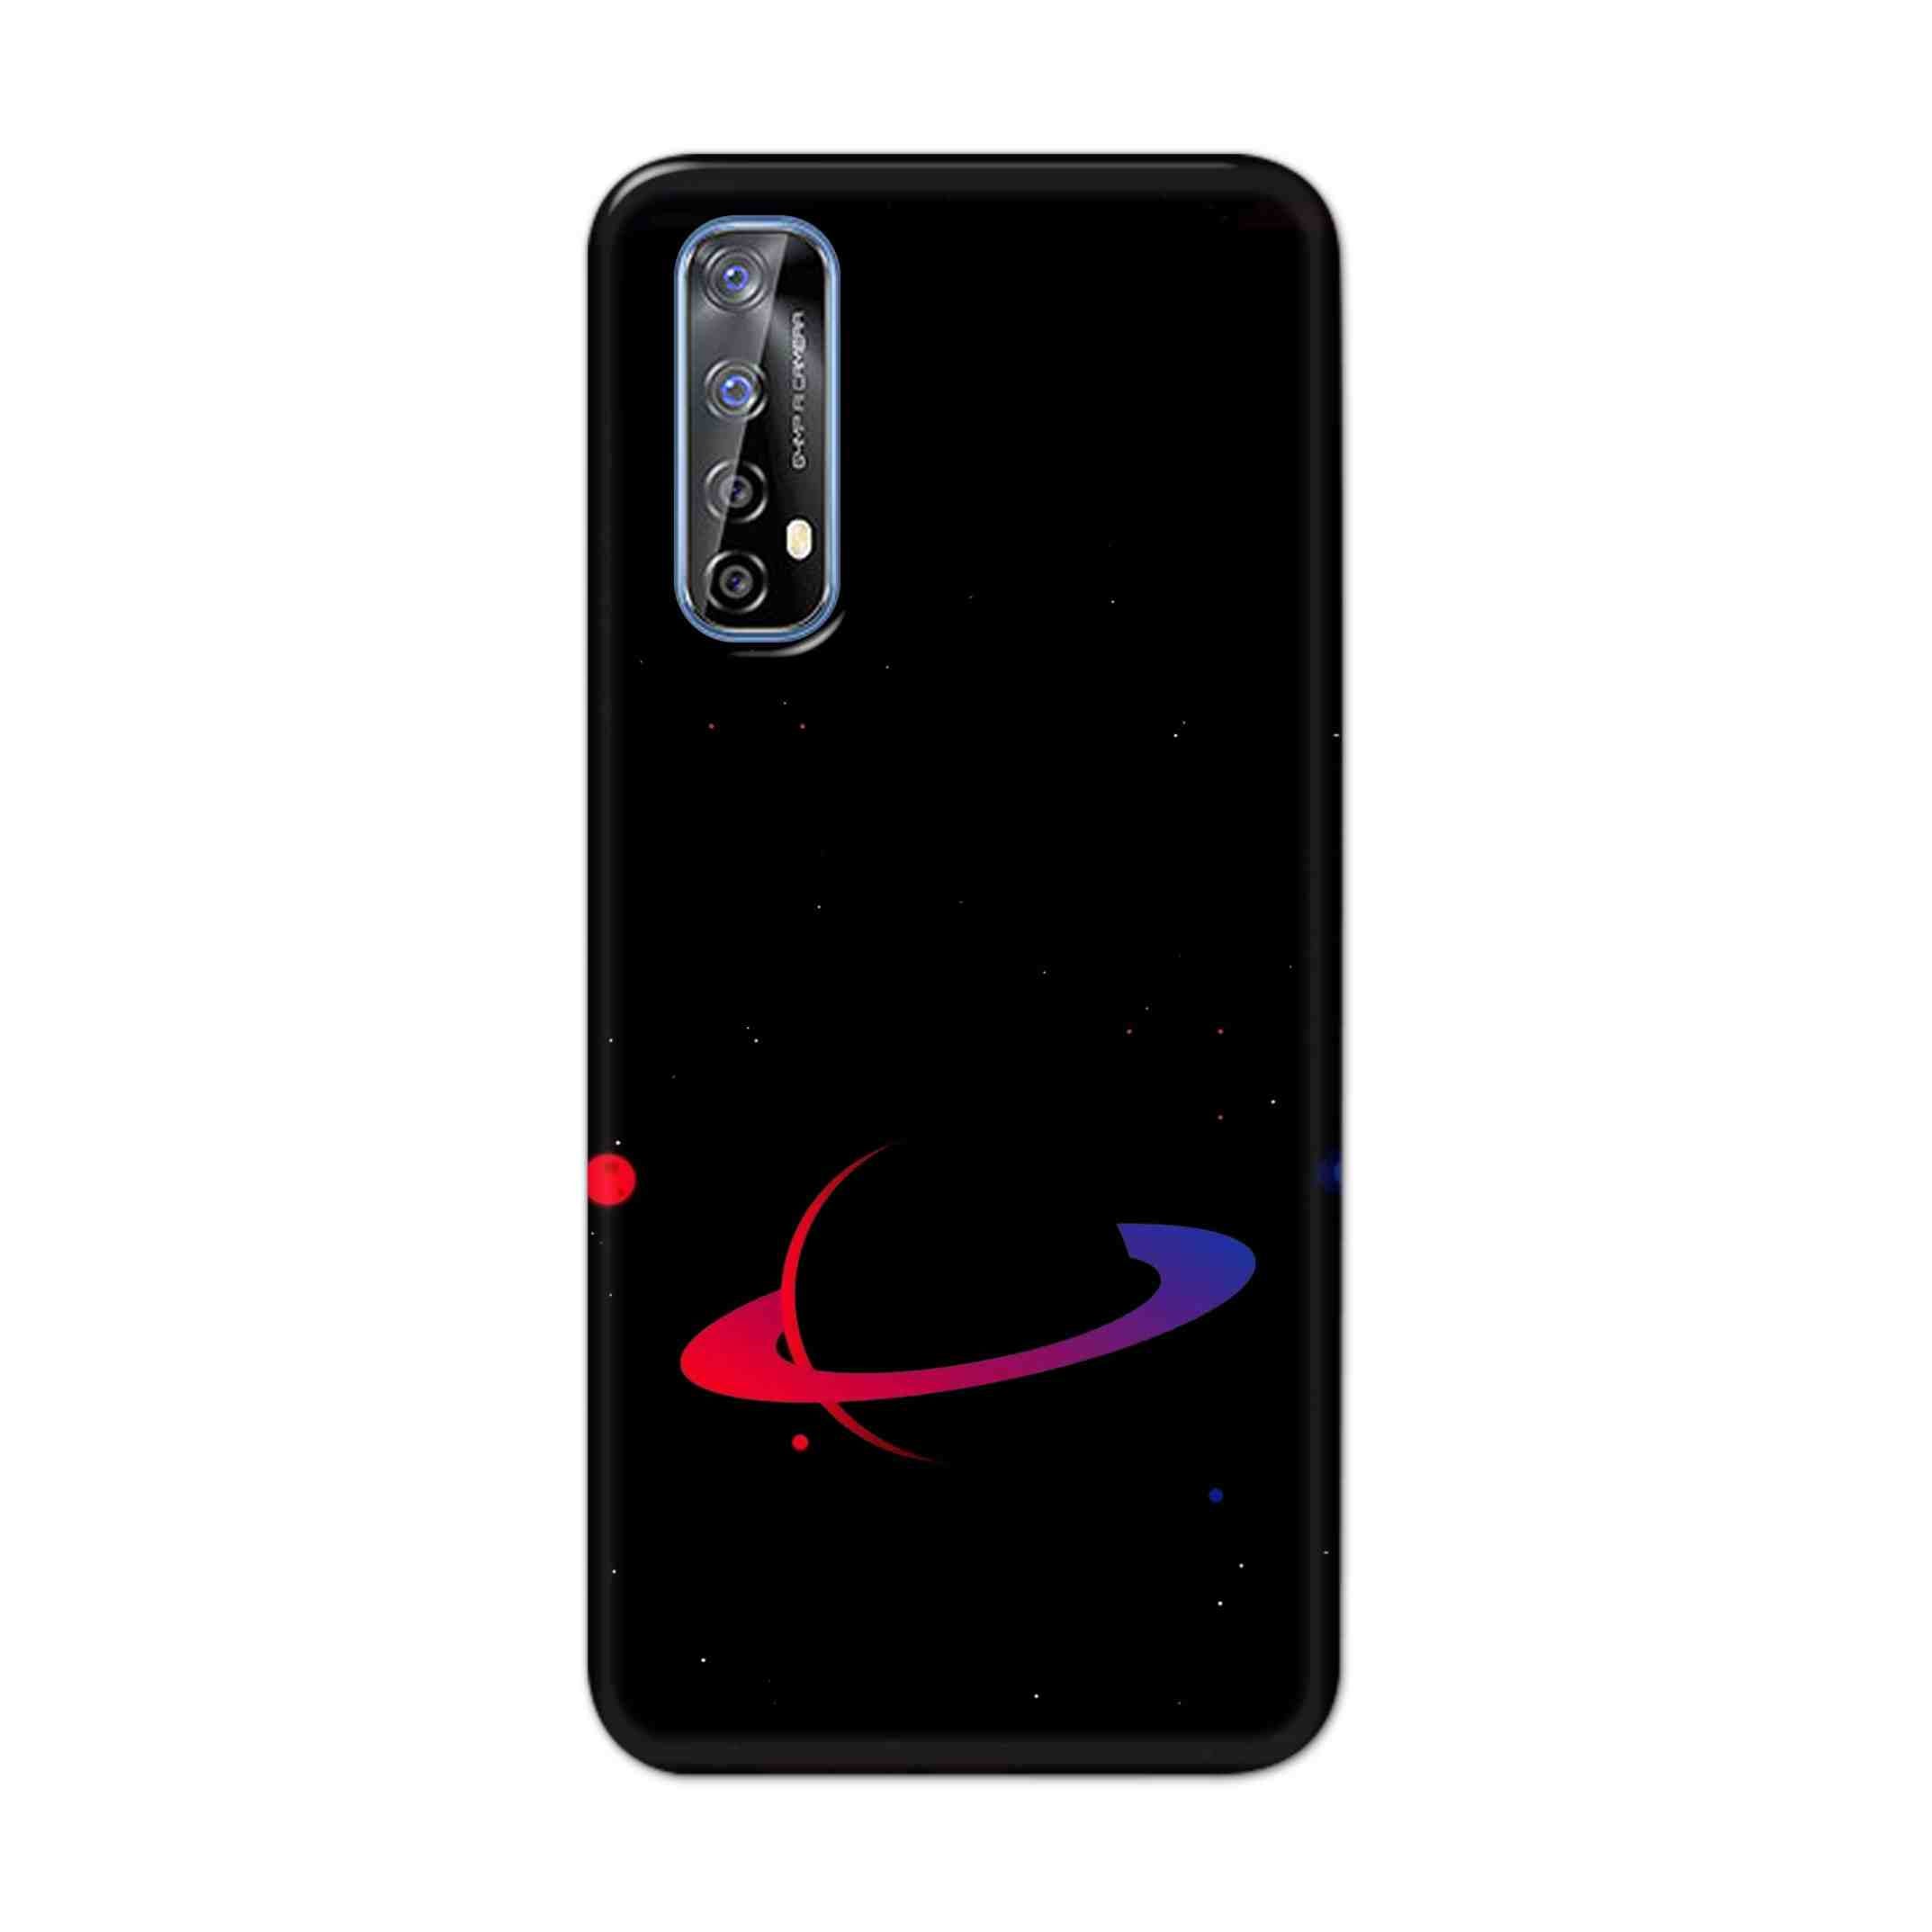 Buy Night Earth Hard Back Mobile Phone Case Cover For Realme 7 Online